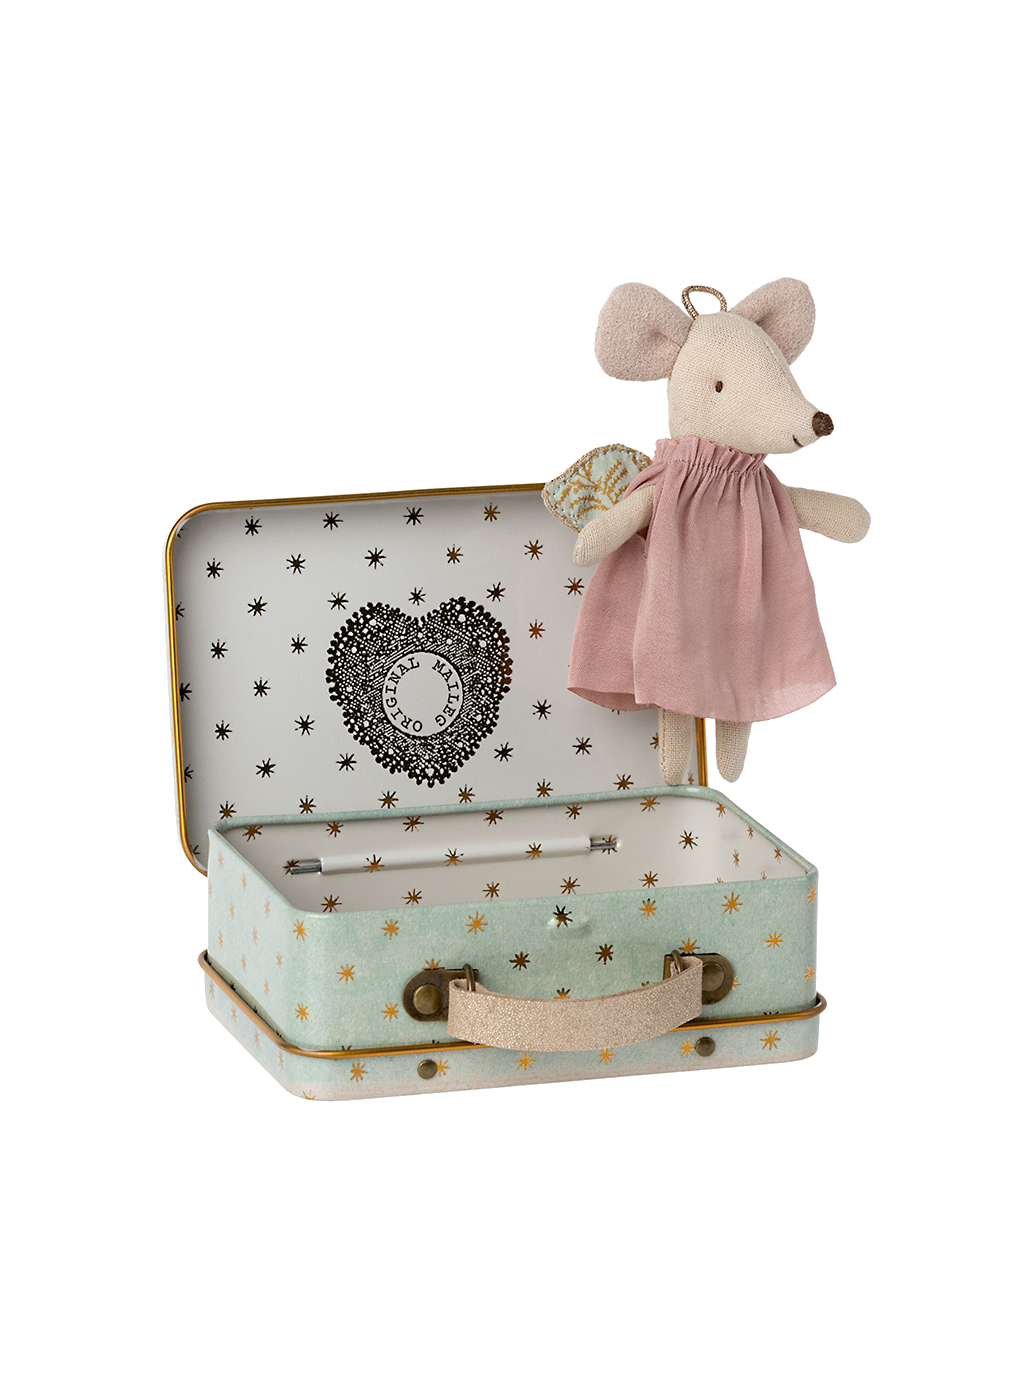 Little angel mouse in a suitcase